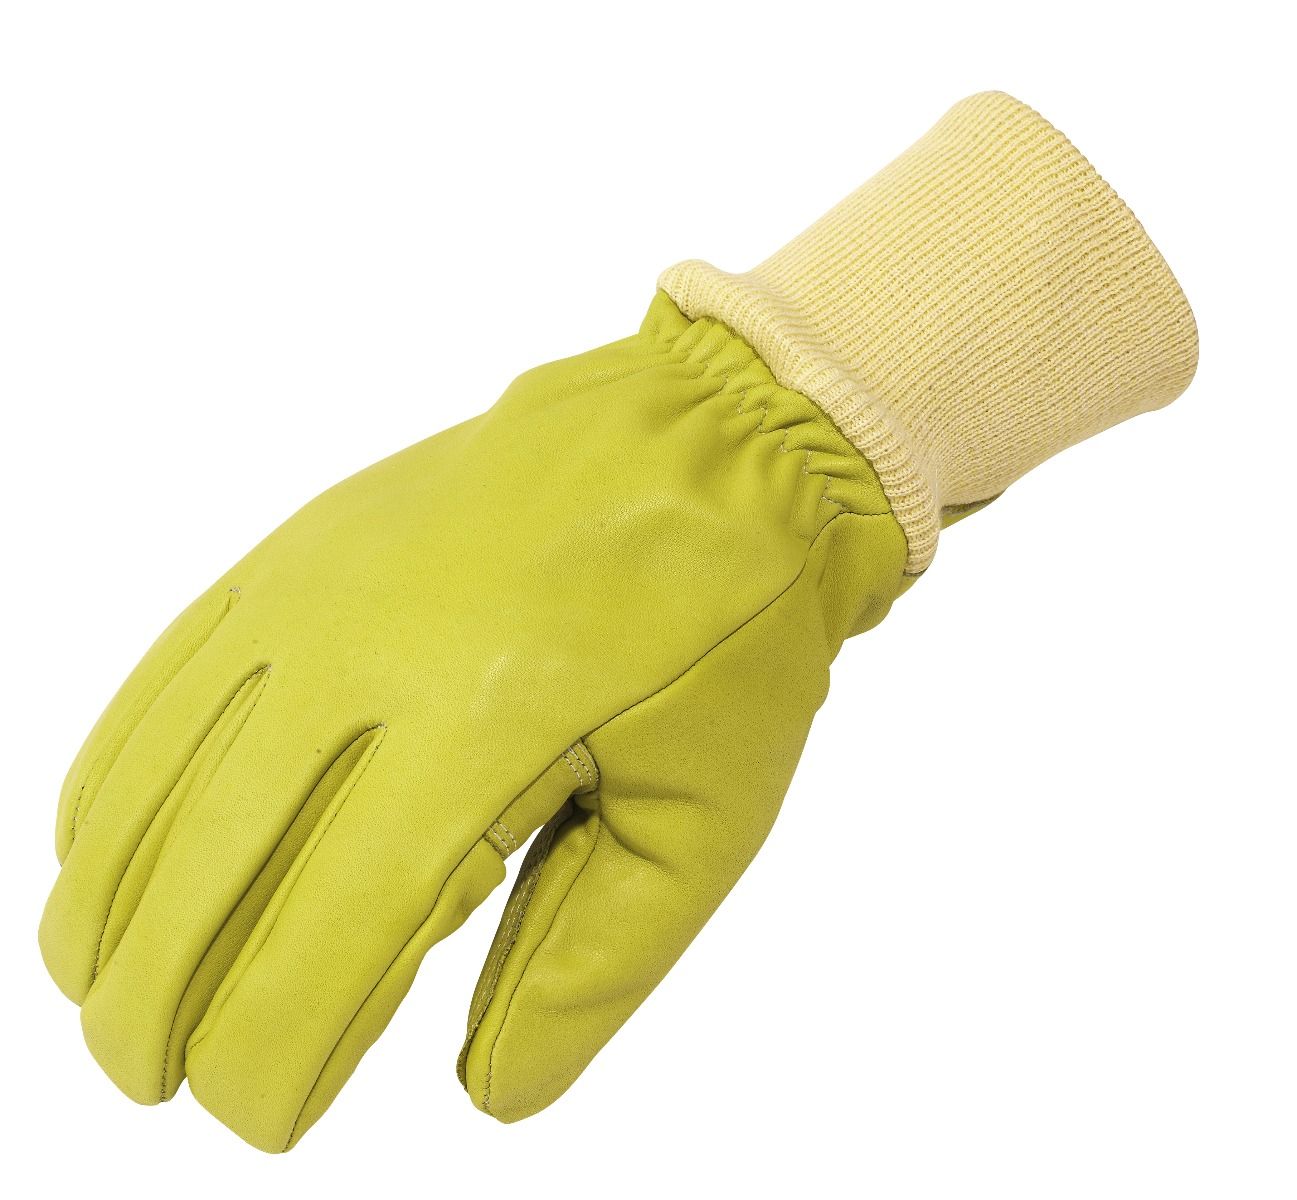 LIME SIZES SMALL TO XXL SOUTHCOMBE FIREMASTER 3 THREE III FIREFIGHTER GLOVES 